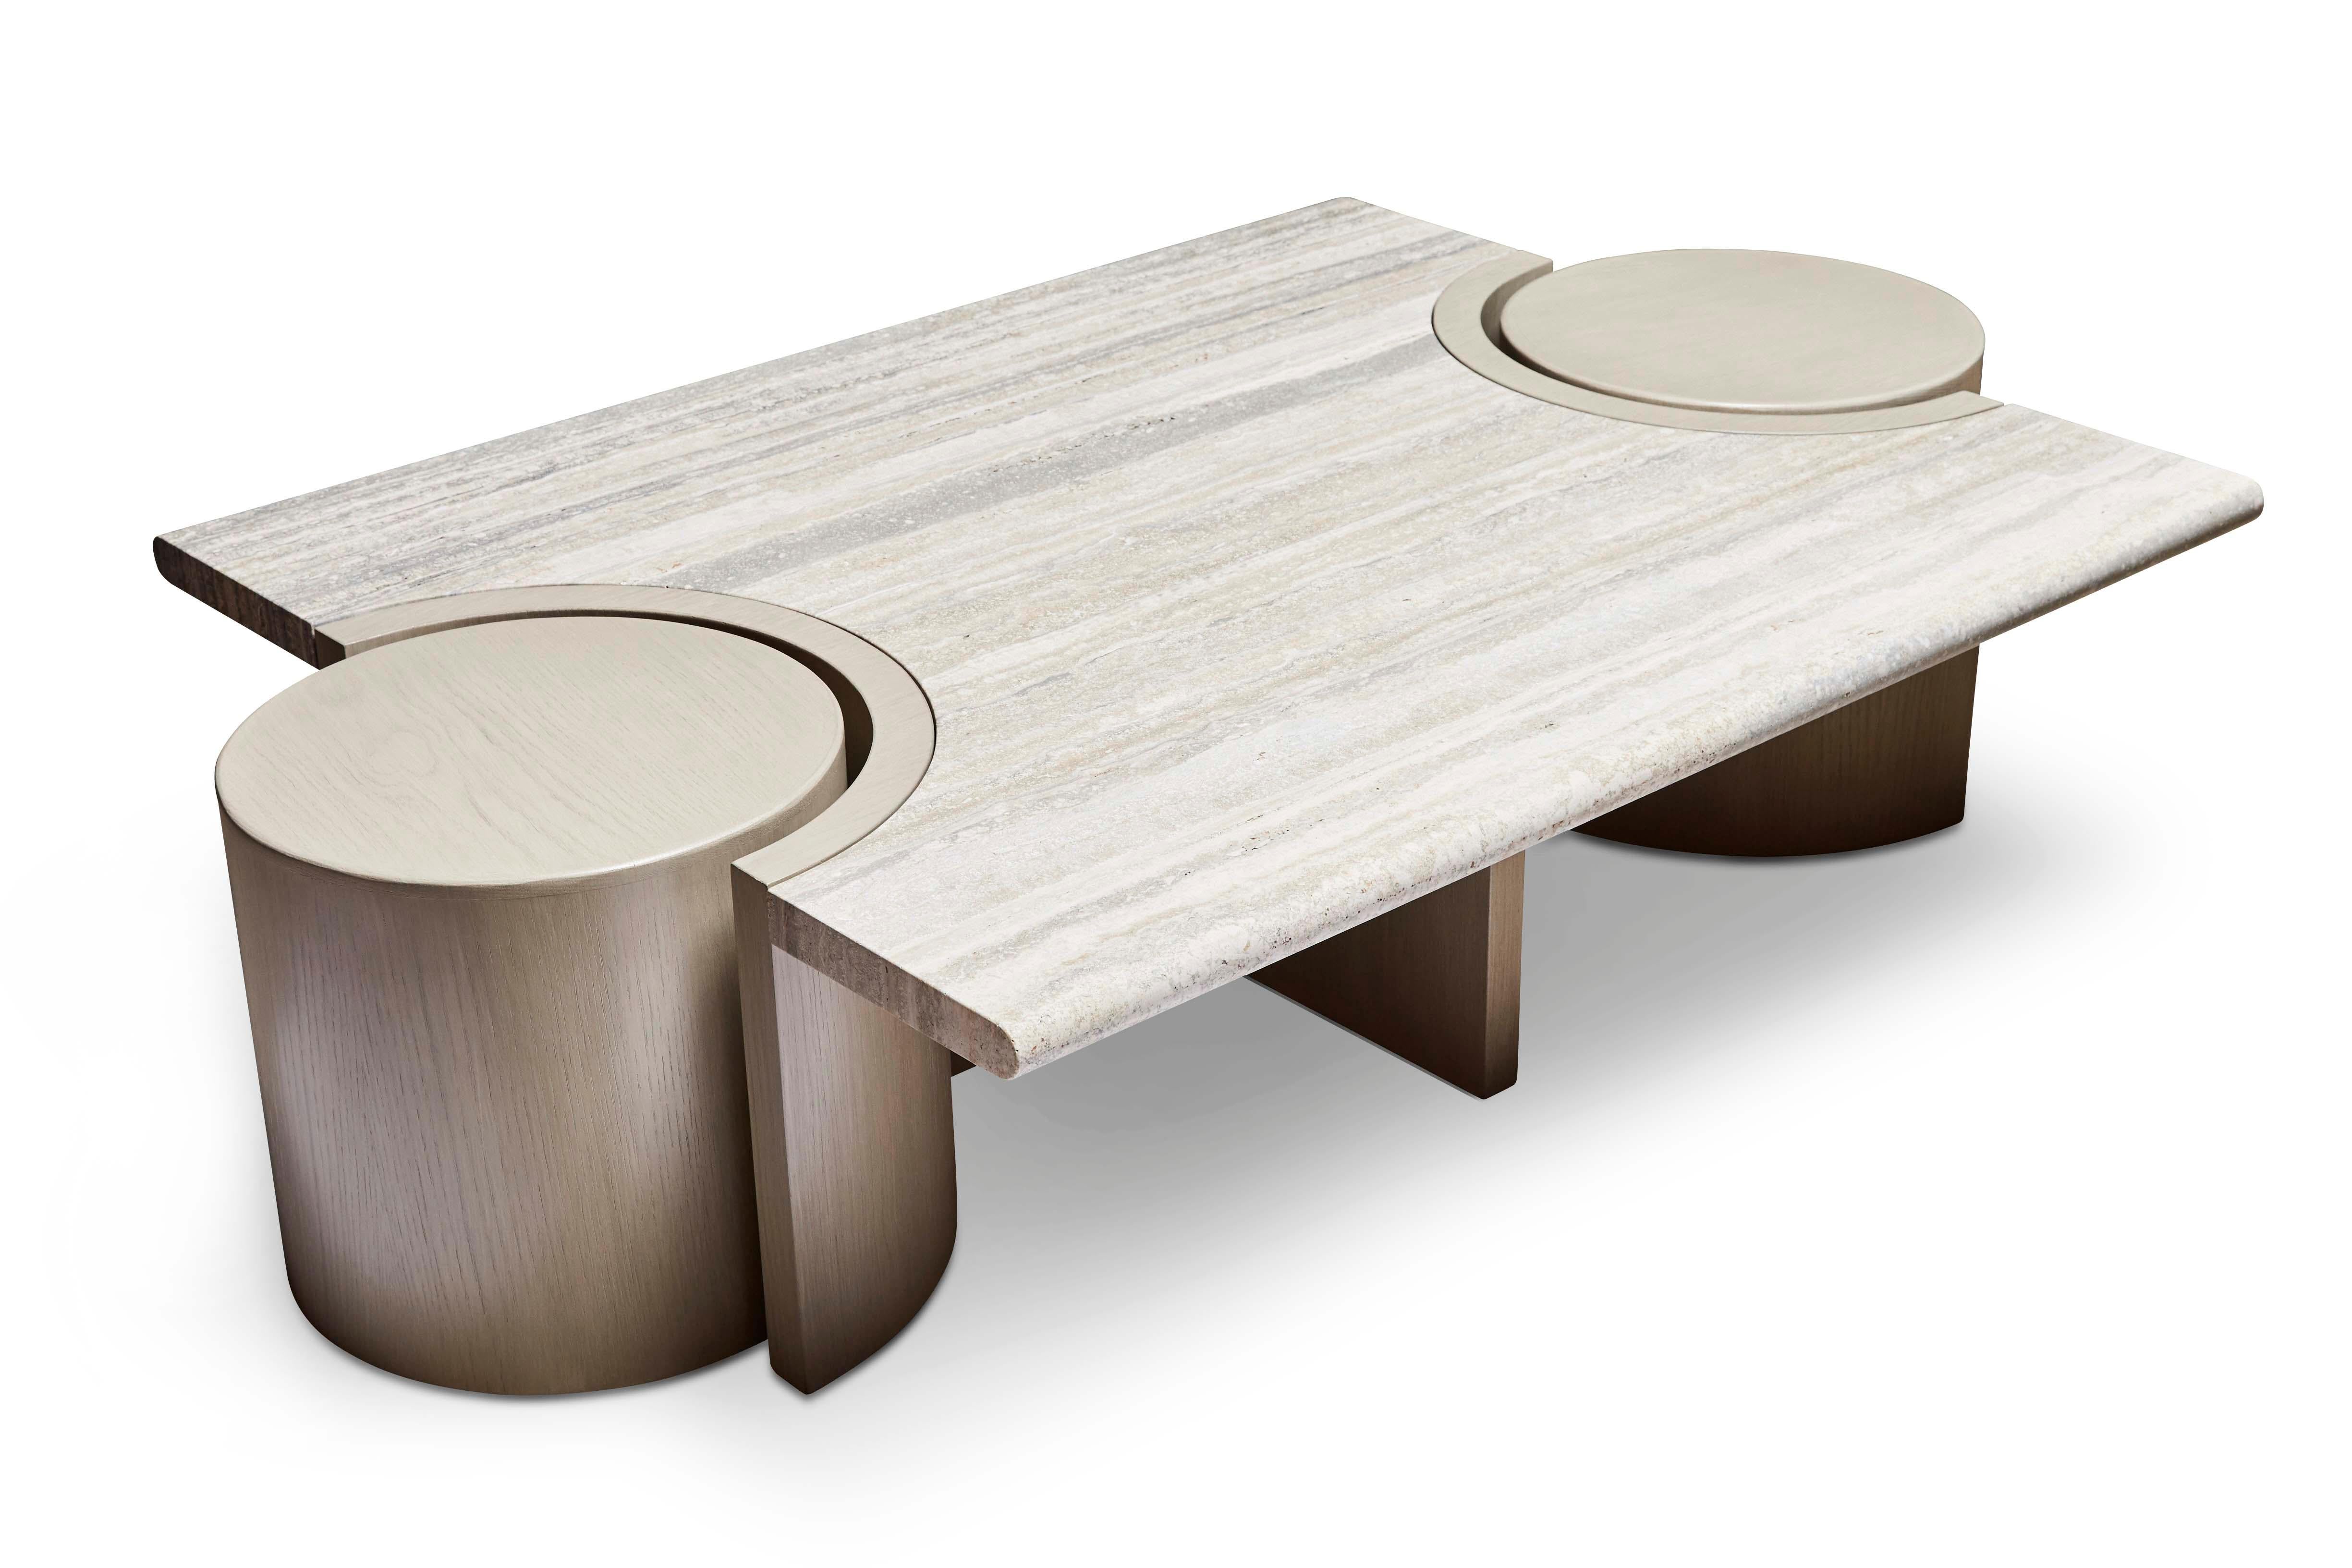 The prospect coffee table features a stone top that rests atop a sculpted American walnut or white oak base with two cutouts for drum tables on either end. 

The Lawson-Fenning Collection is designed and handmade in Los Angeles, California. Reach